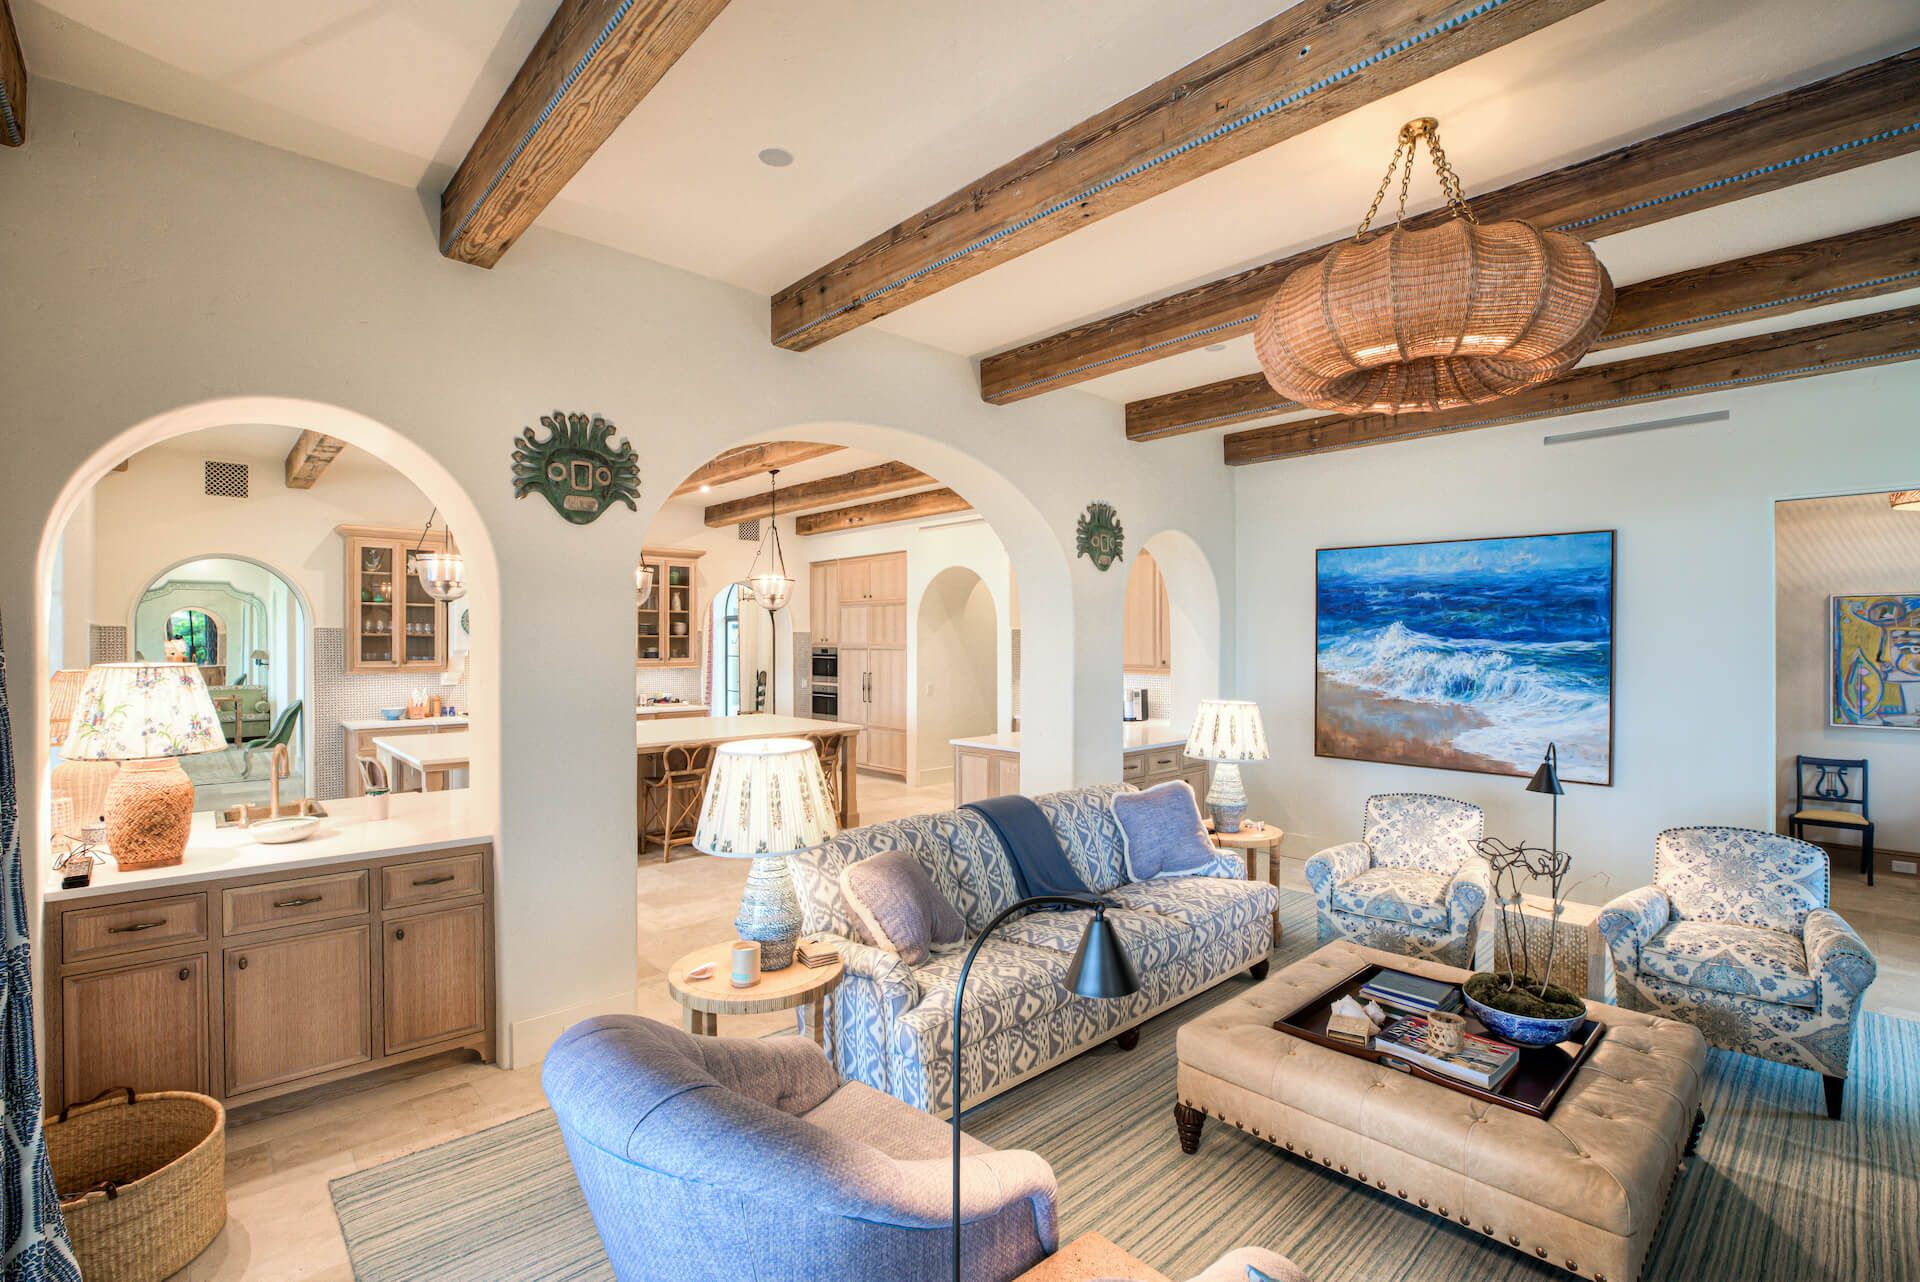 Living room with wood beams and high end furnishings